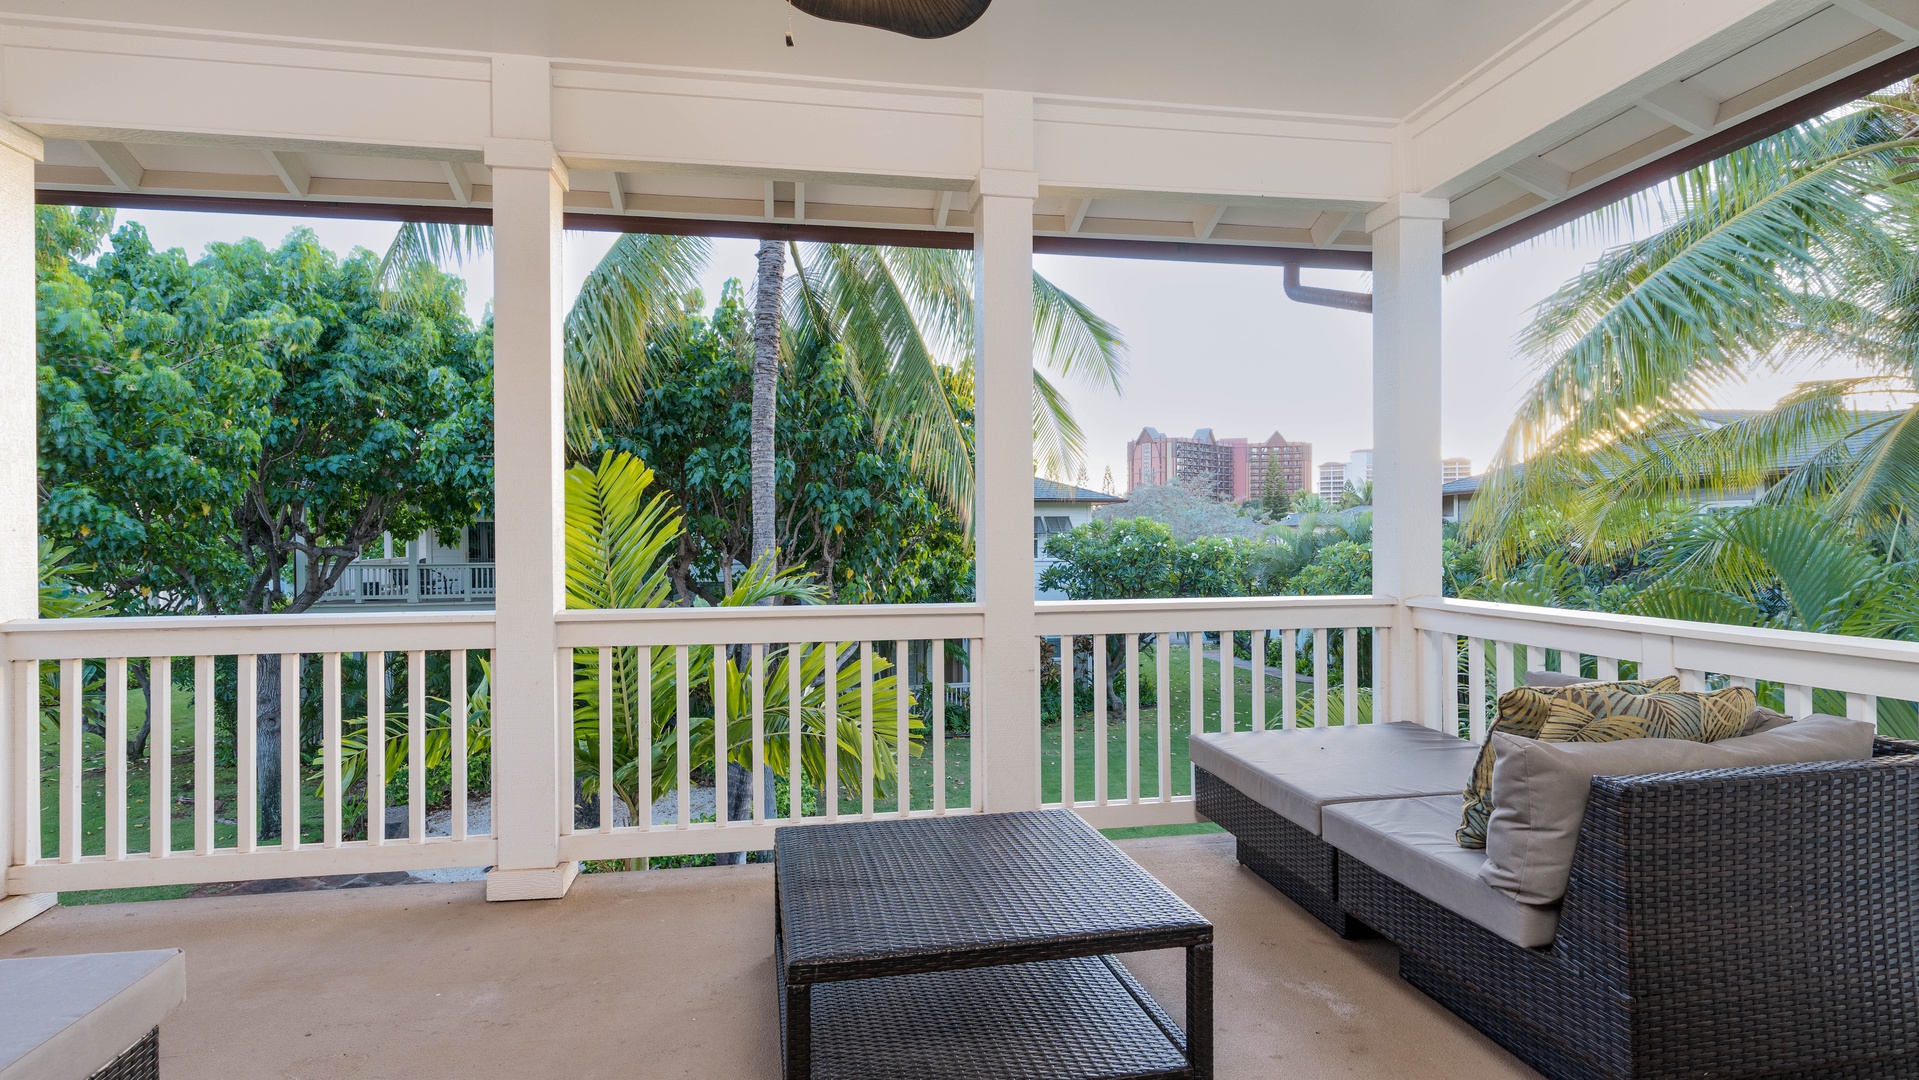 Kapolei Vacation Rentals, Coconut Plantation 1194-3 - A peaceful setting to relax and unwind.